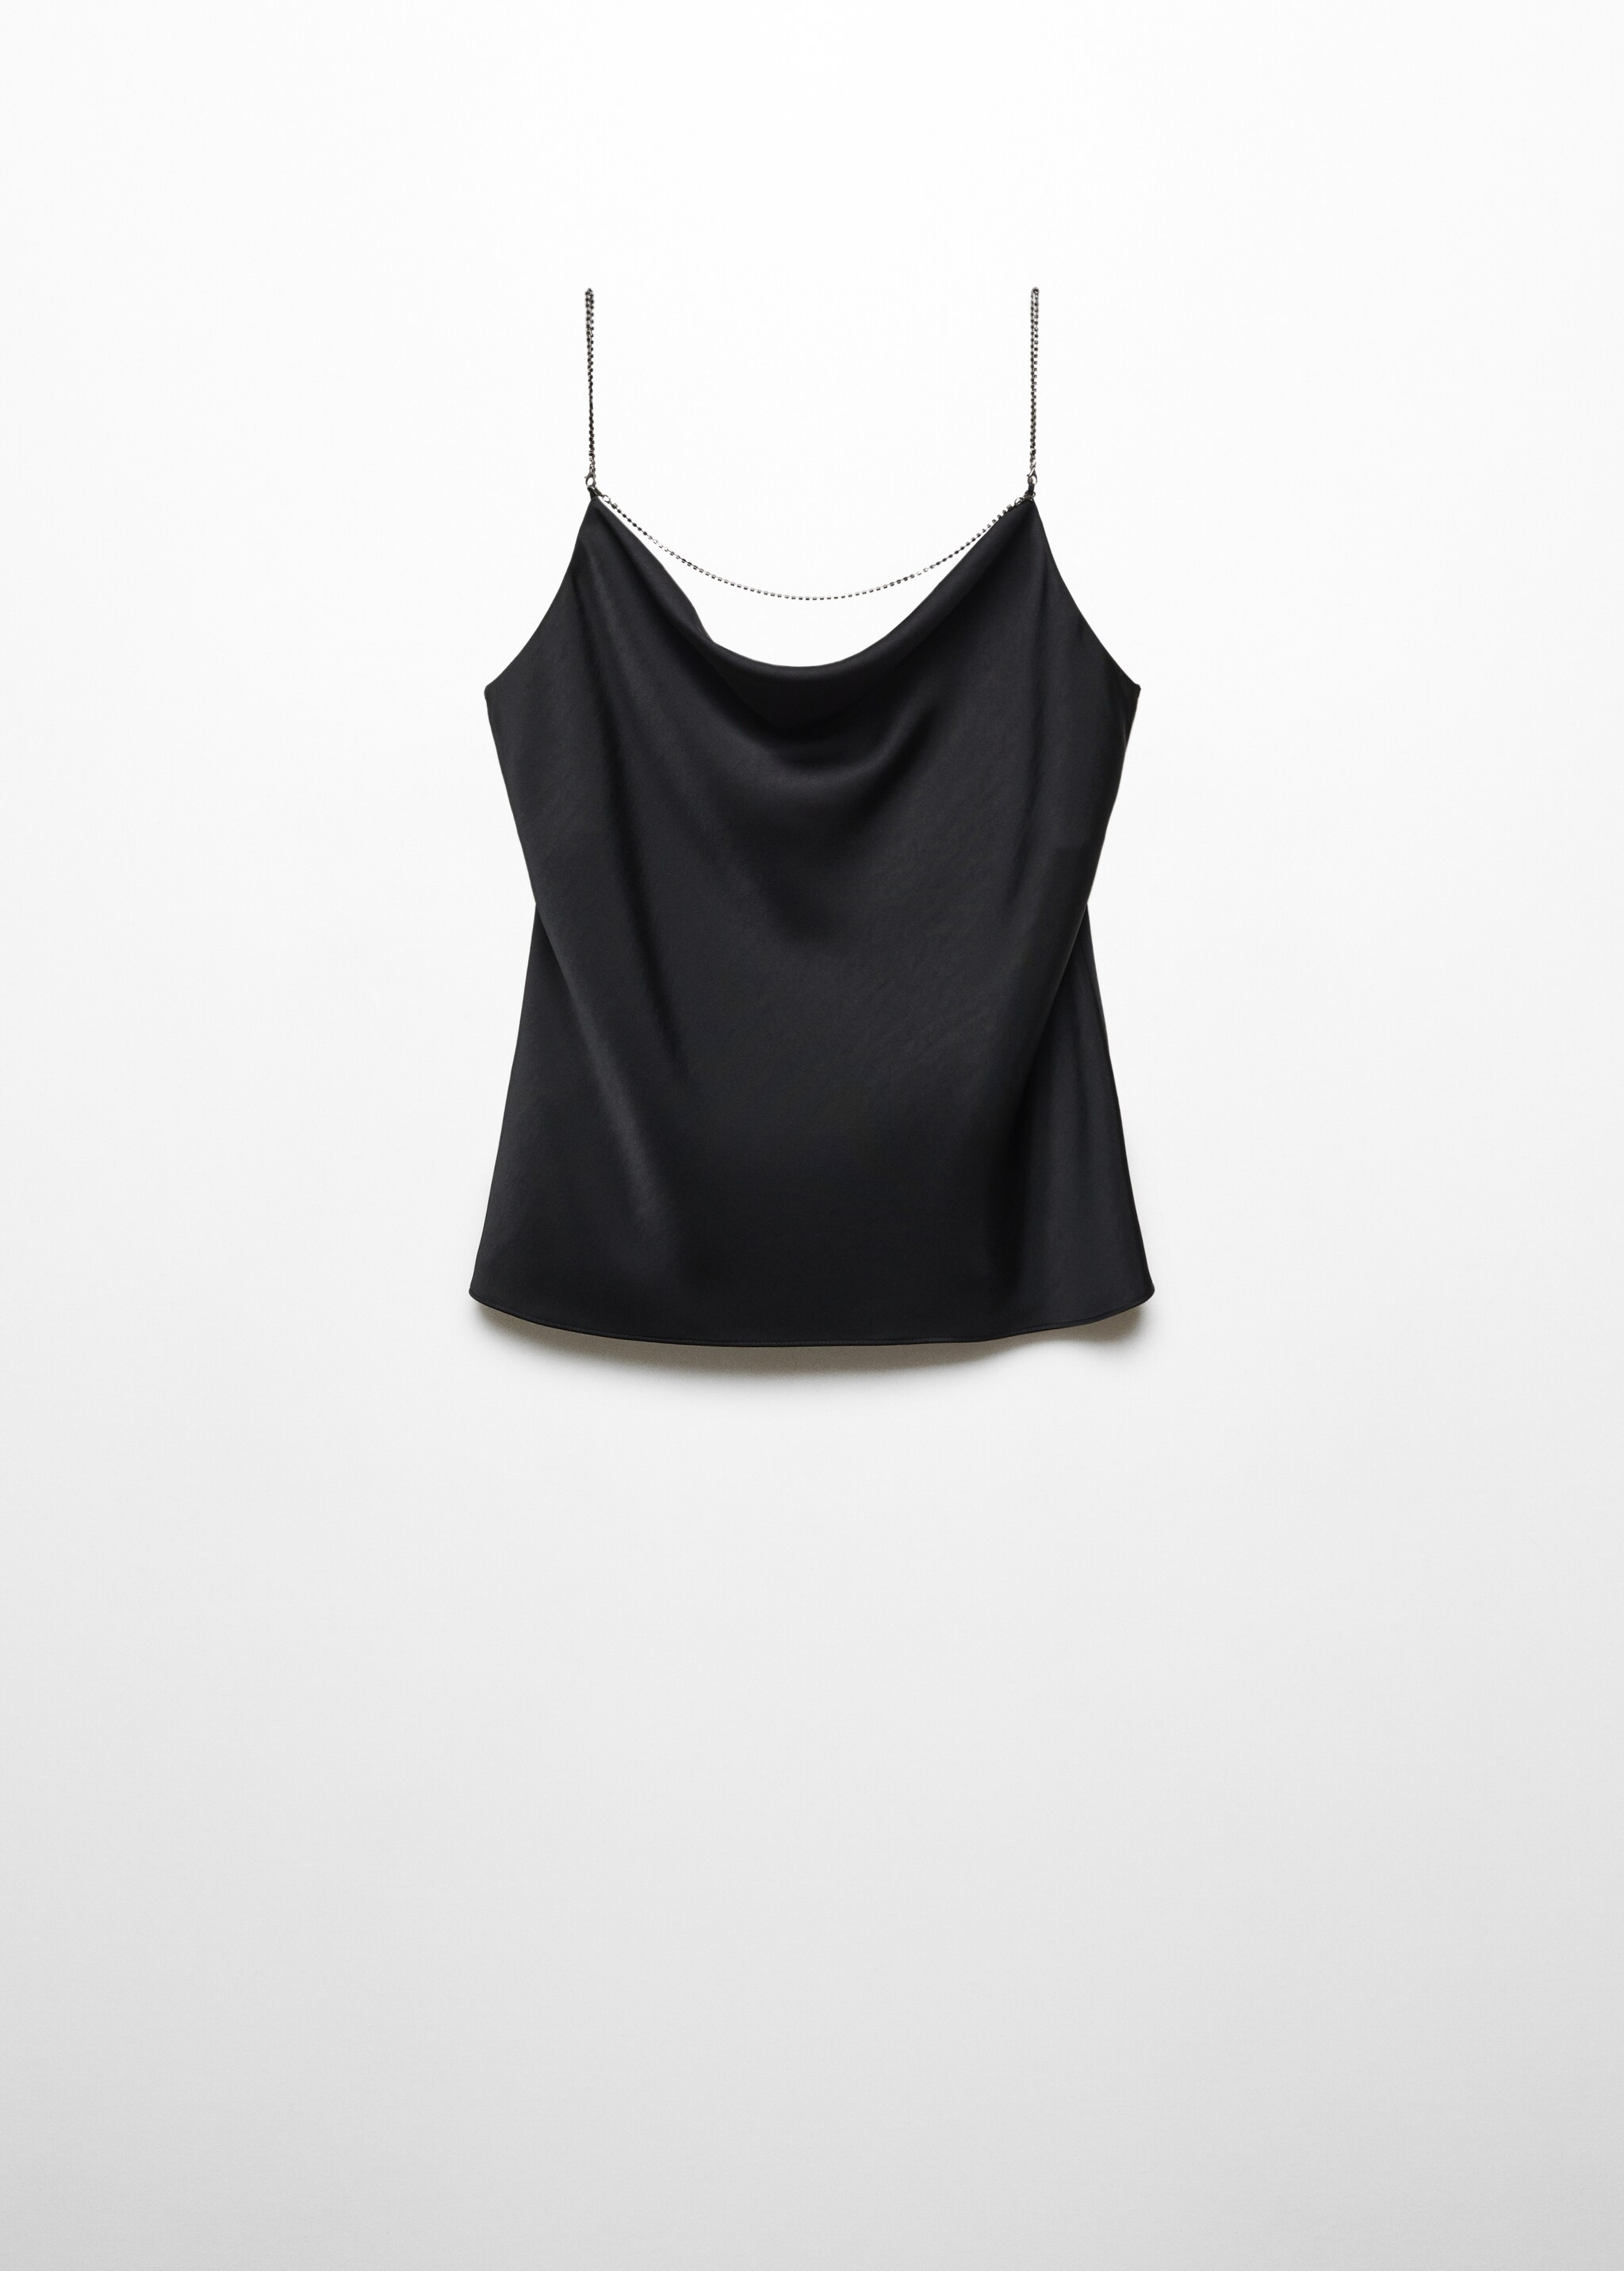 Draped neck satin top - Article without model